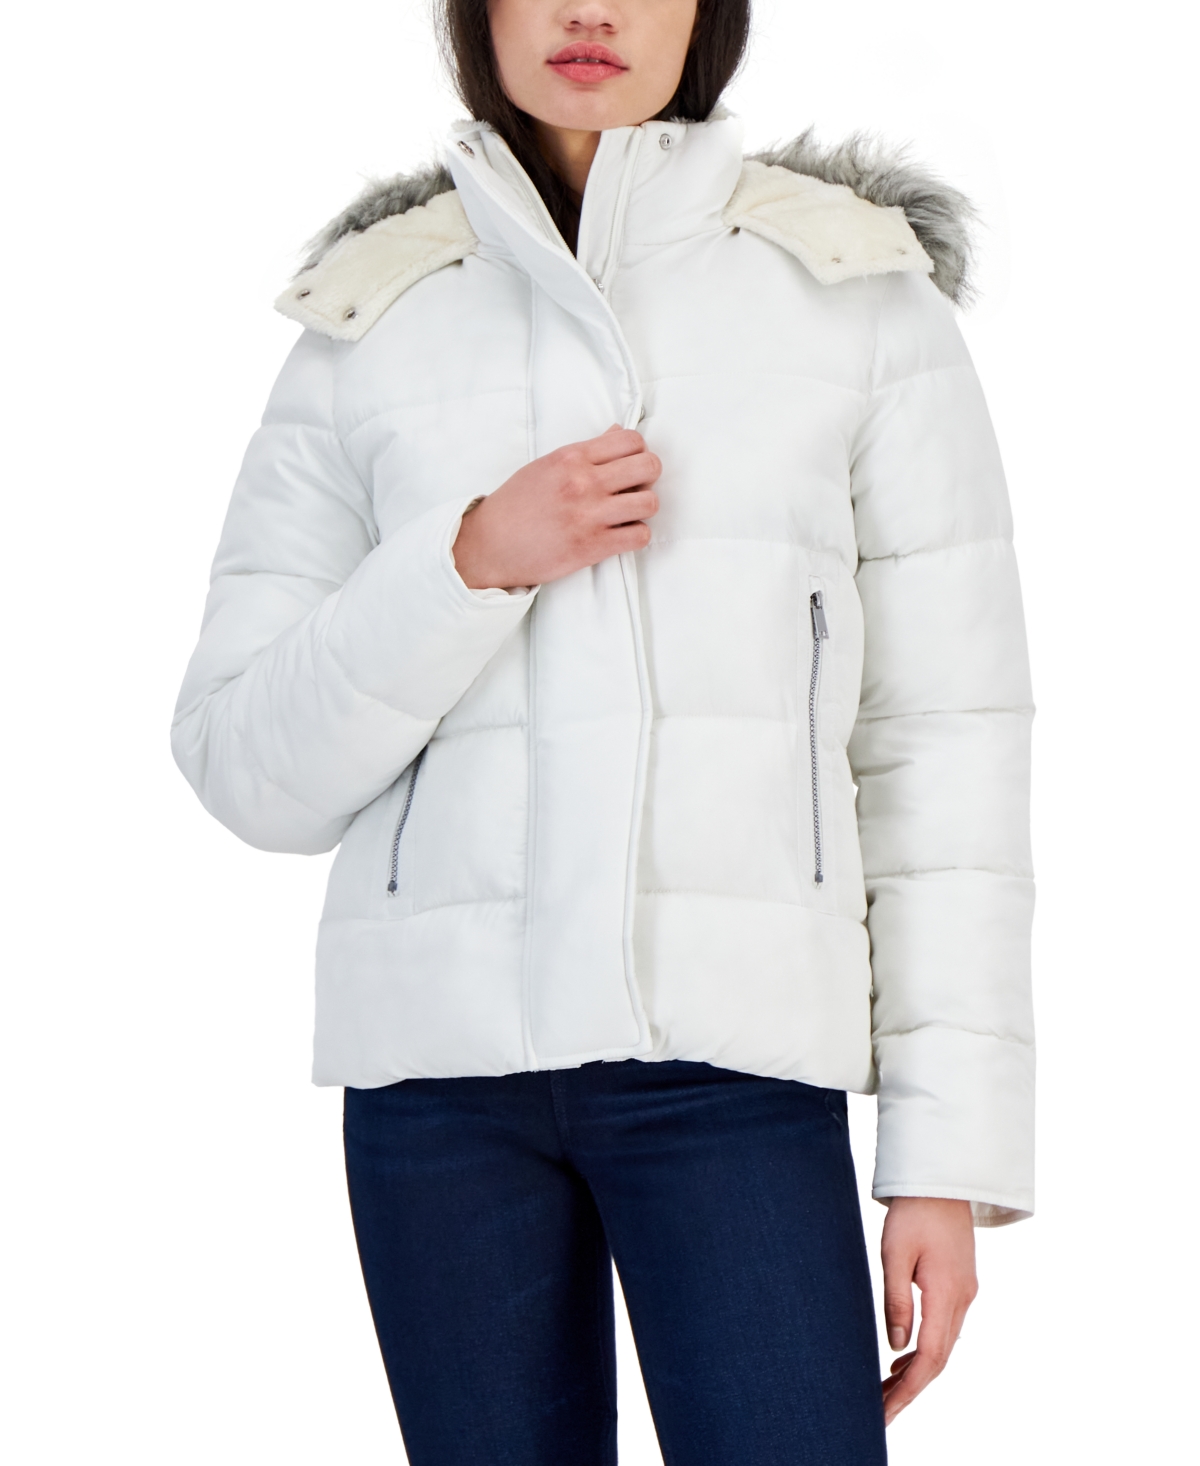 Juniors' Faux-Fur-Trim Hooded Puffer Coat, Created for Macy's - Winter White